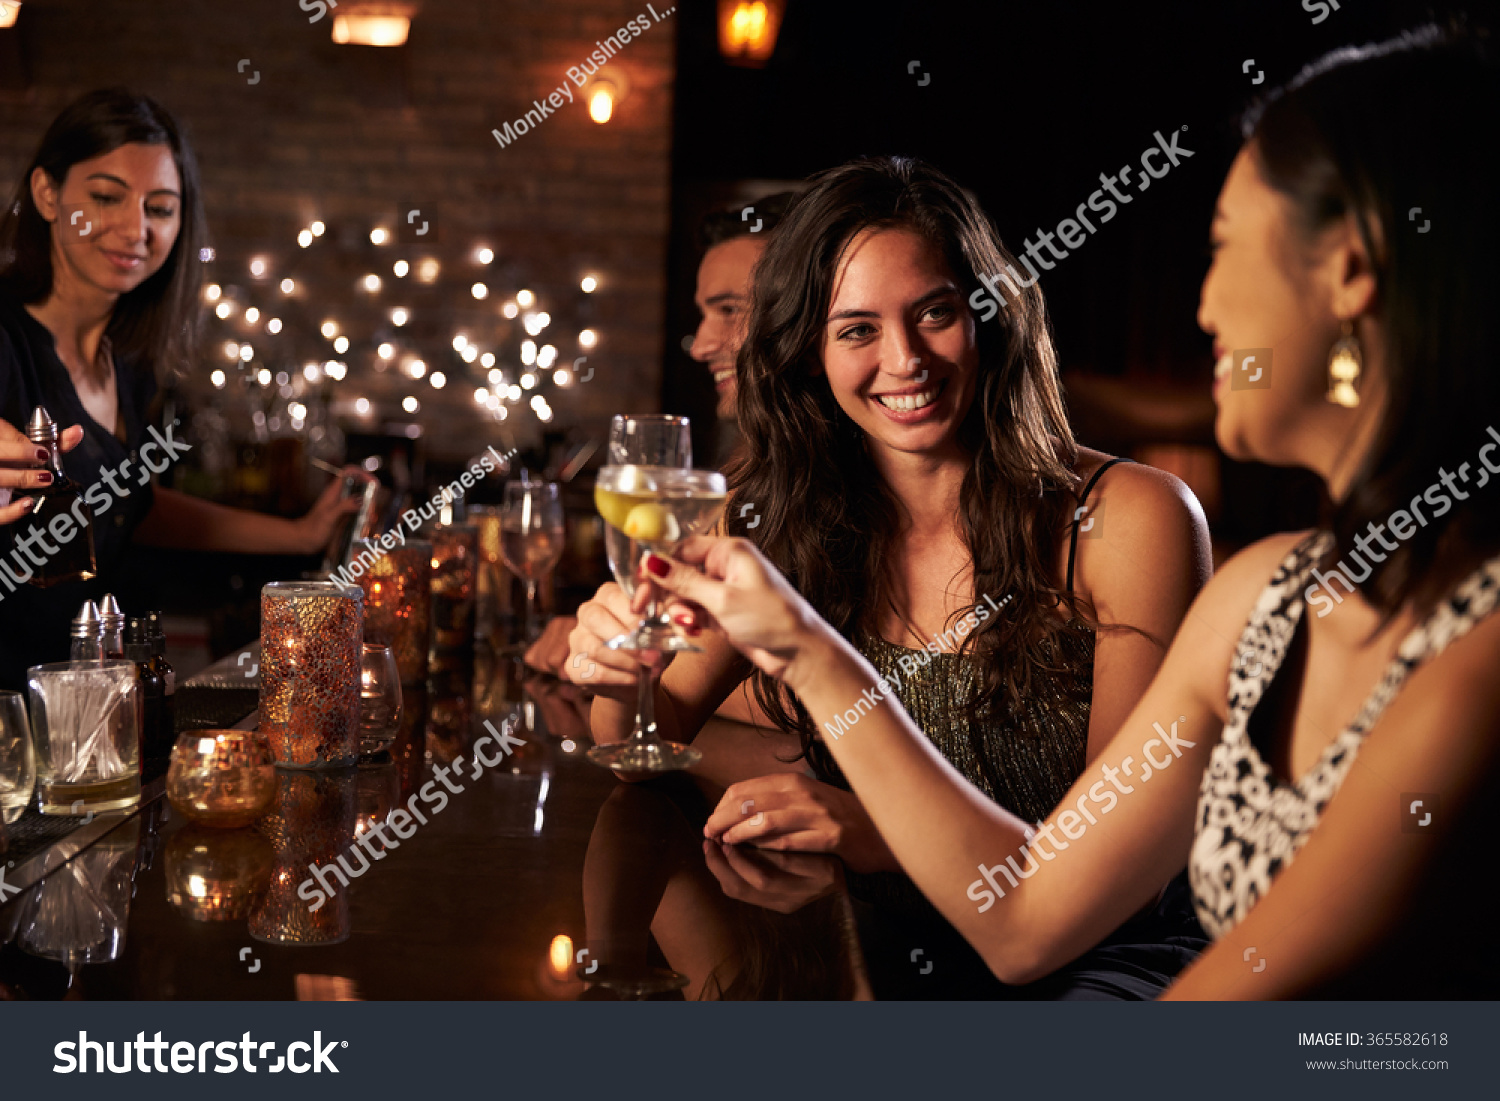 Female Friends Enjoying Night Out At Cocktail Bar #365582618